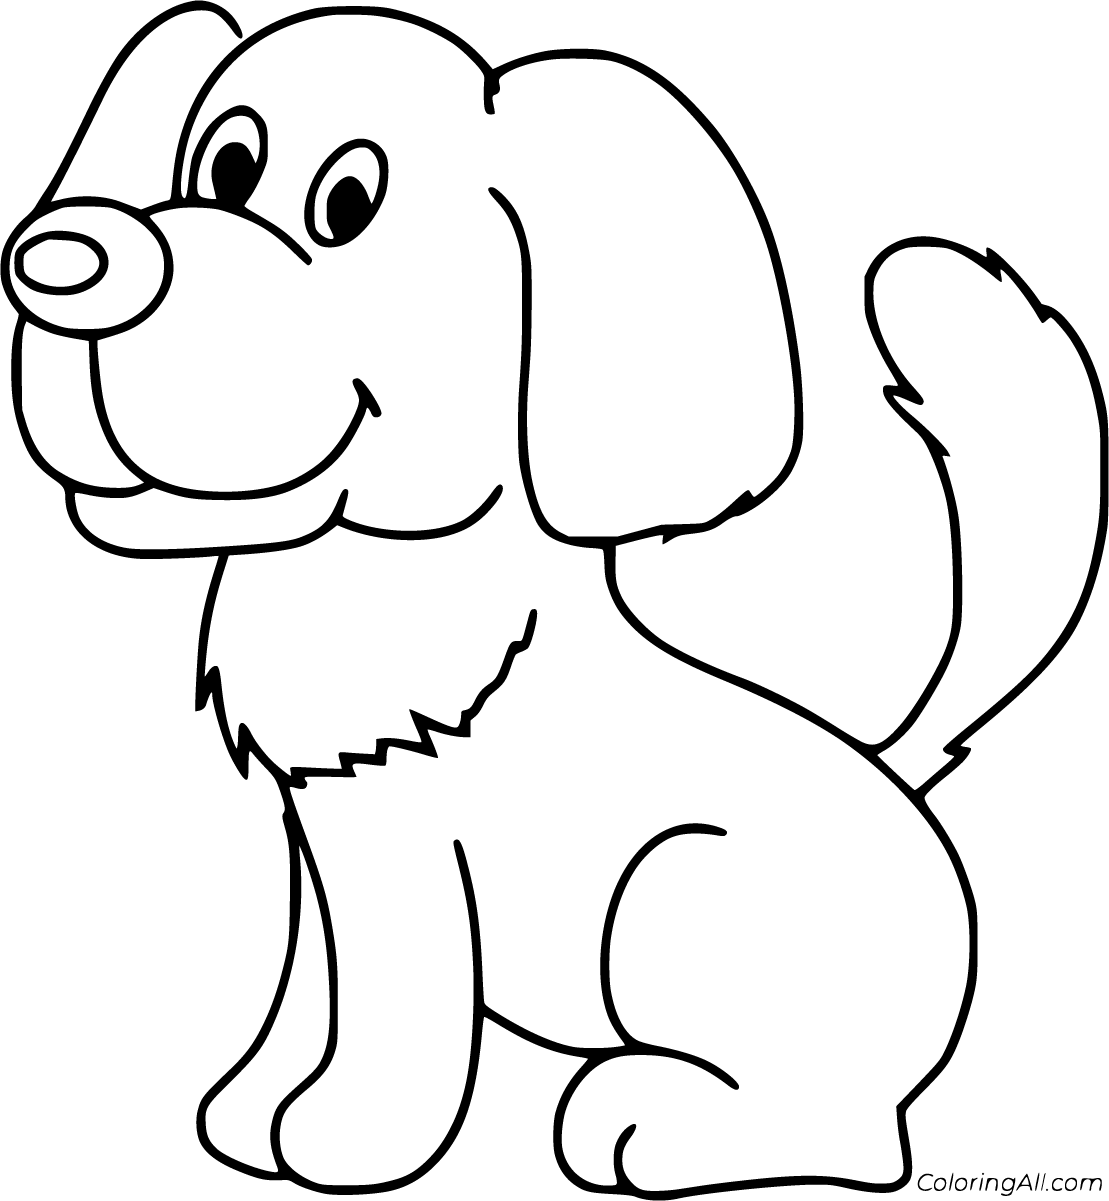 Cute Dog Coloring Pages - ColoringAll